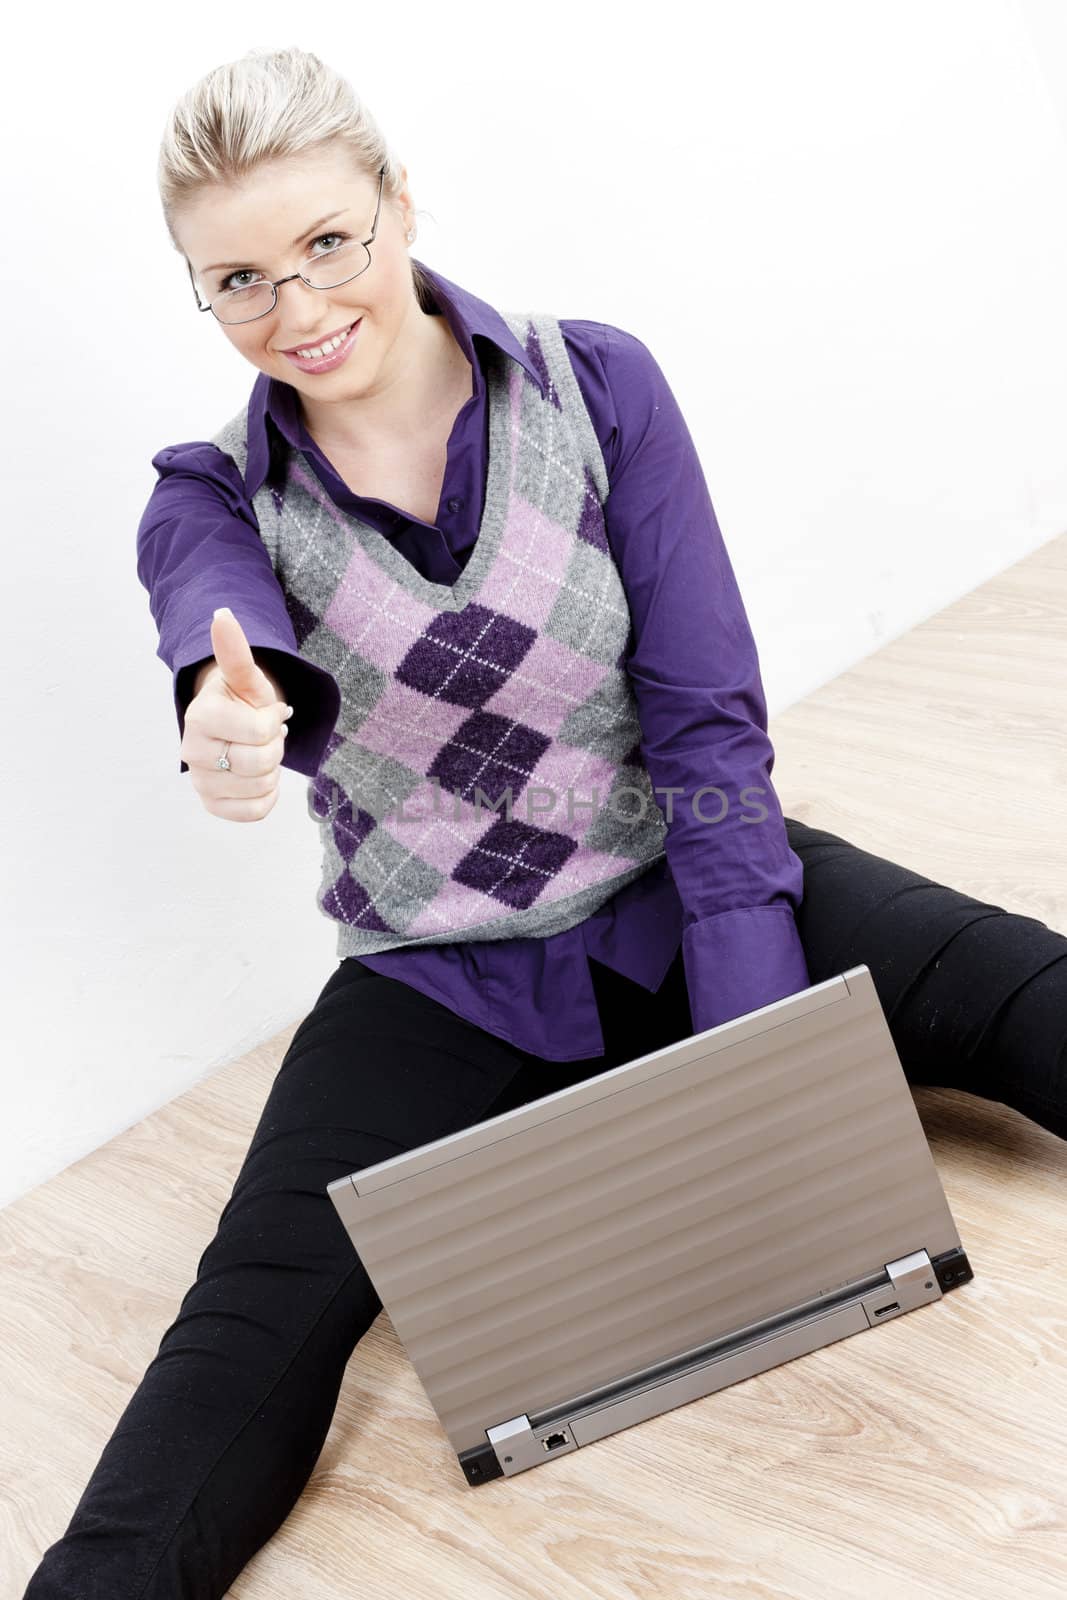 sitting young businesswoman with a notebook